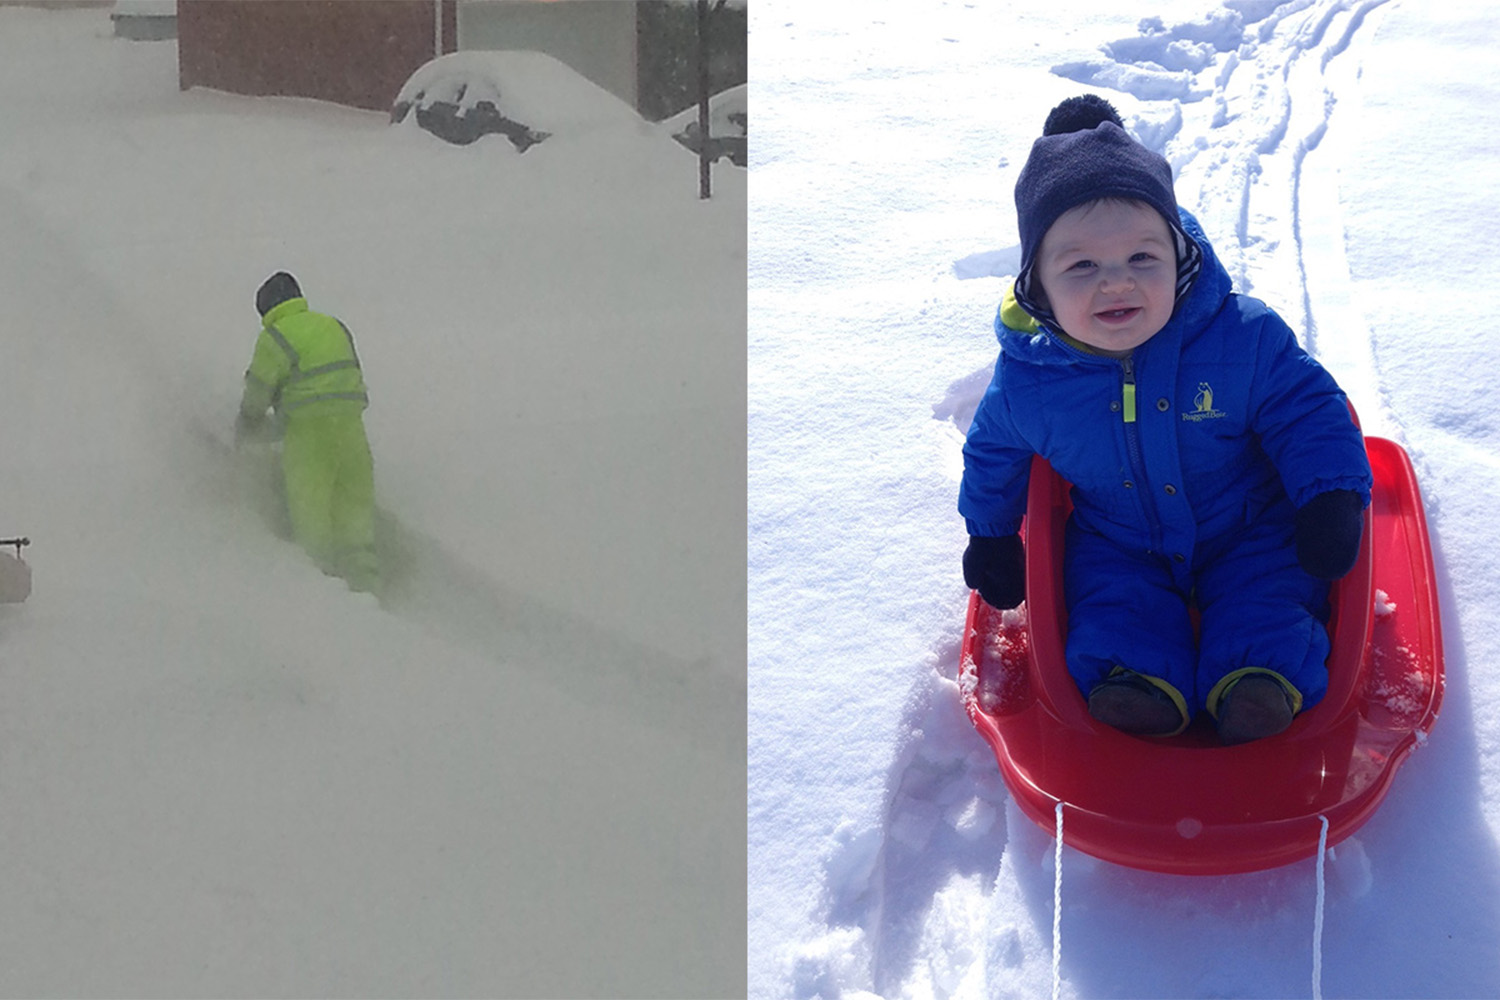 Tammi's husband Rob takes a snow blower to the sidewalks while Katie's son, Michael, gets some sledding in.